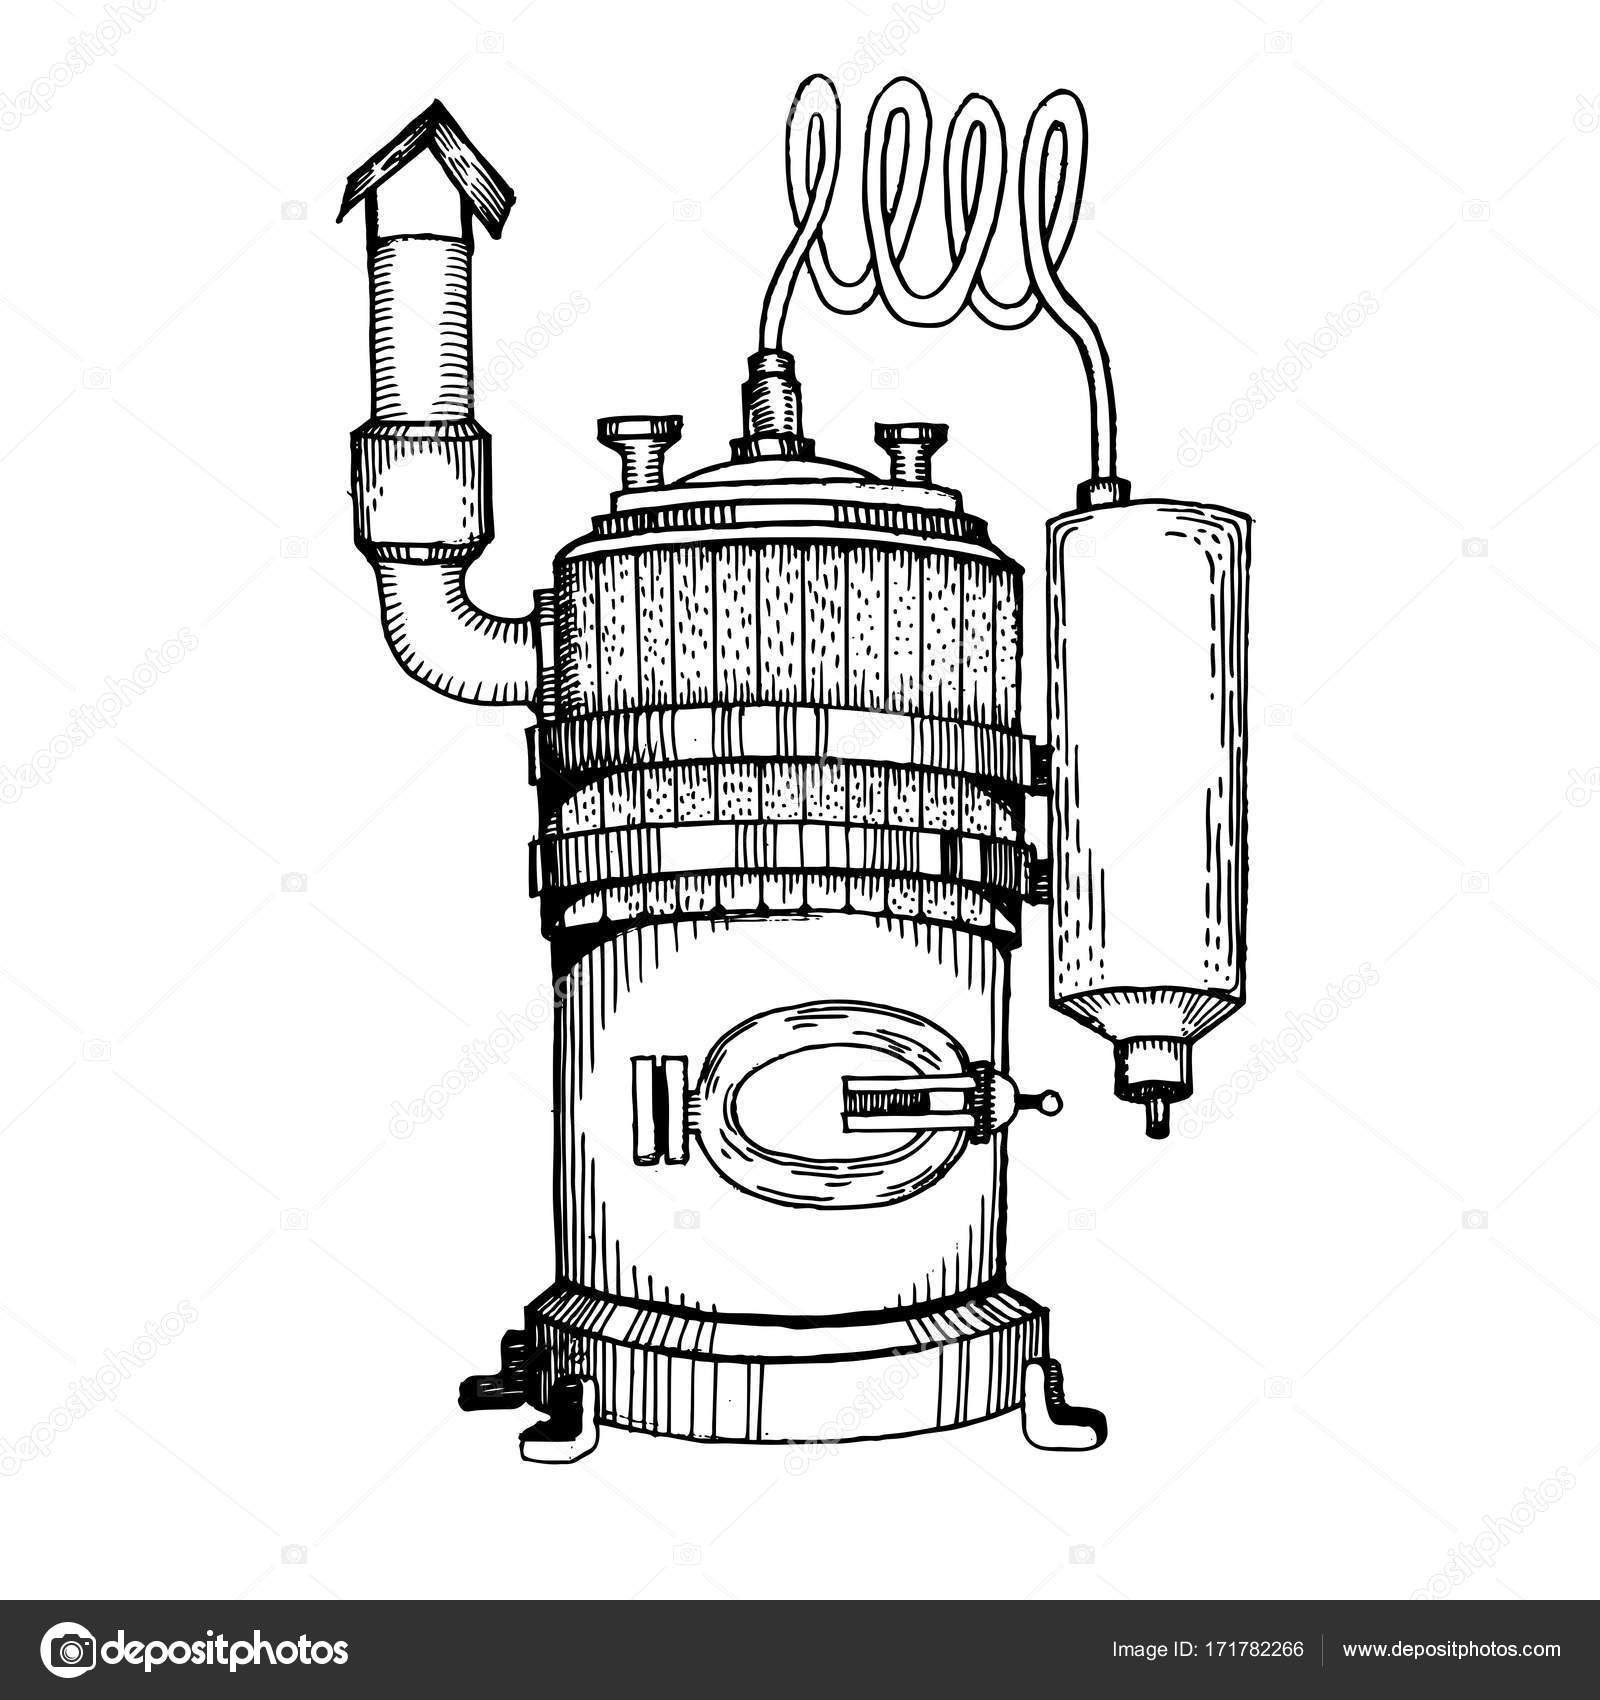 Old mechanic sewing machine sketch engraving vector illustration. Scratch  board style imitation. Black and white hand drawn image. Stock Vector